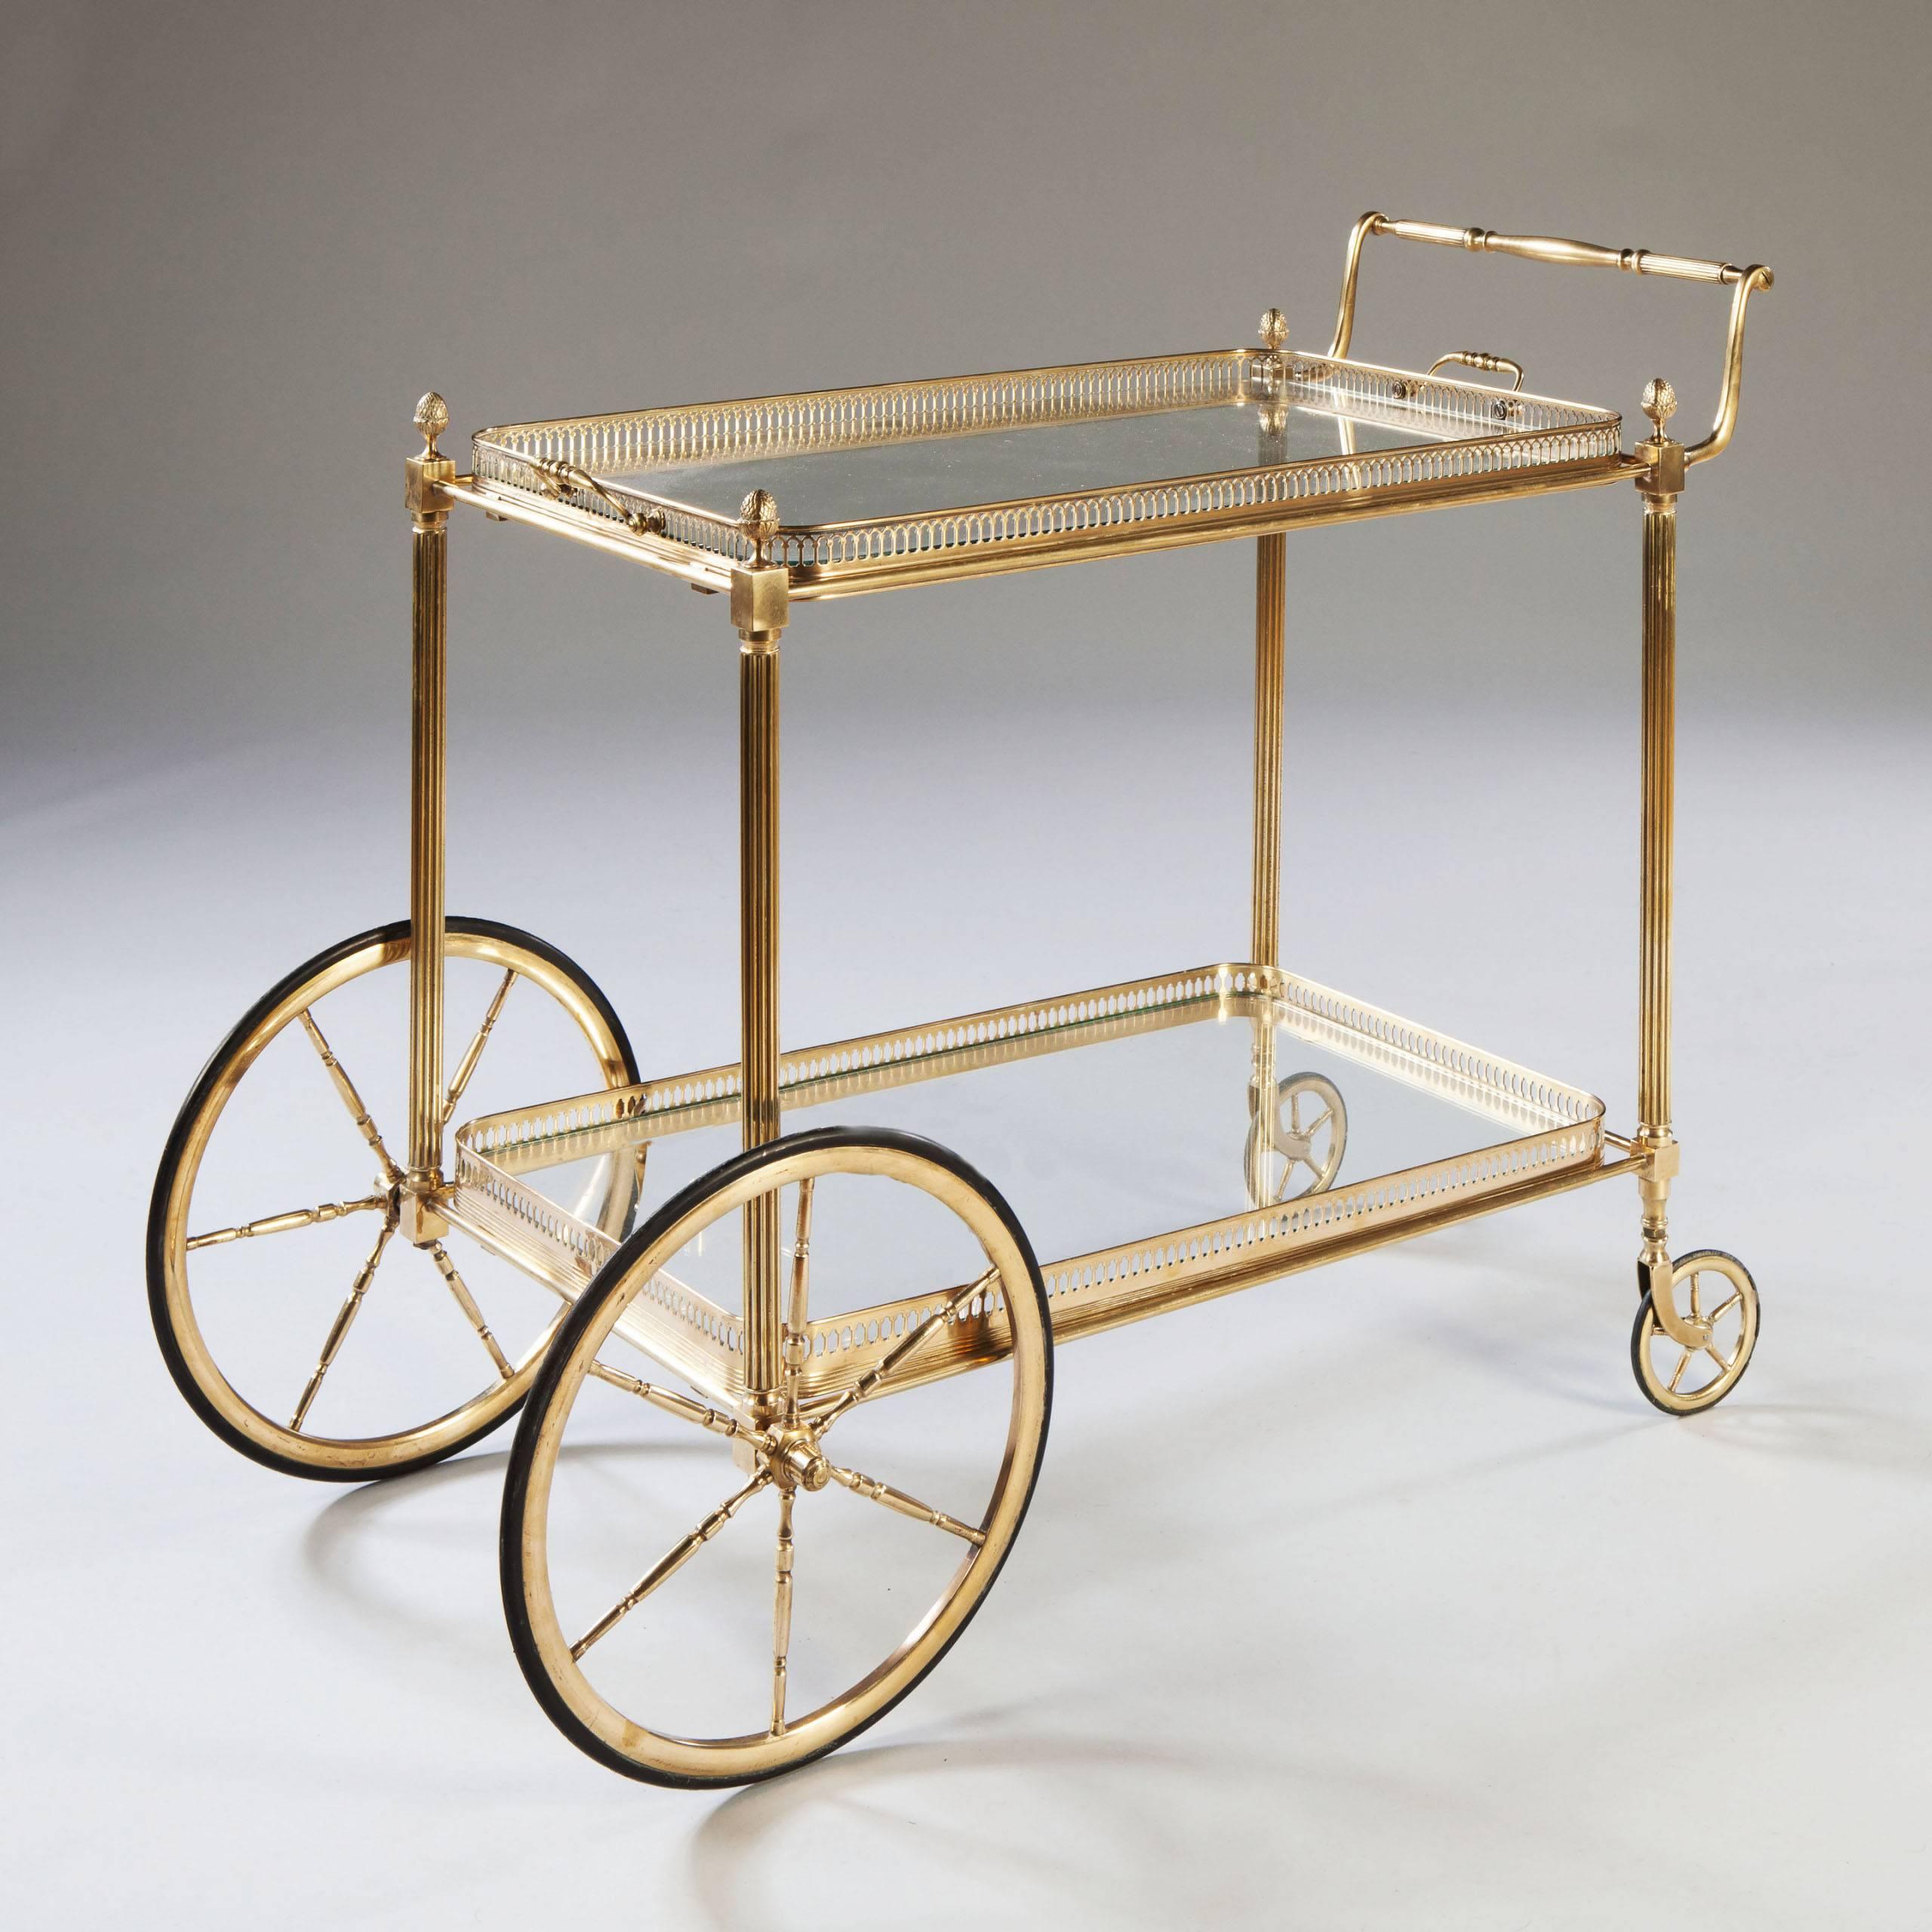 A fine quality mid-20th century polished brass and glass two tier drinks trolley by Maison Jansen.

​Both trays removable and the upper one with handles. This trolley with larger wheels at the front. 

Bar cart.
Cocktail table. 
Champagne